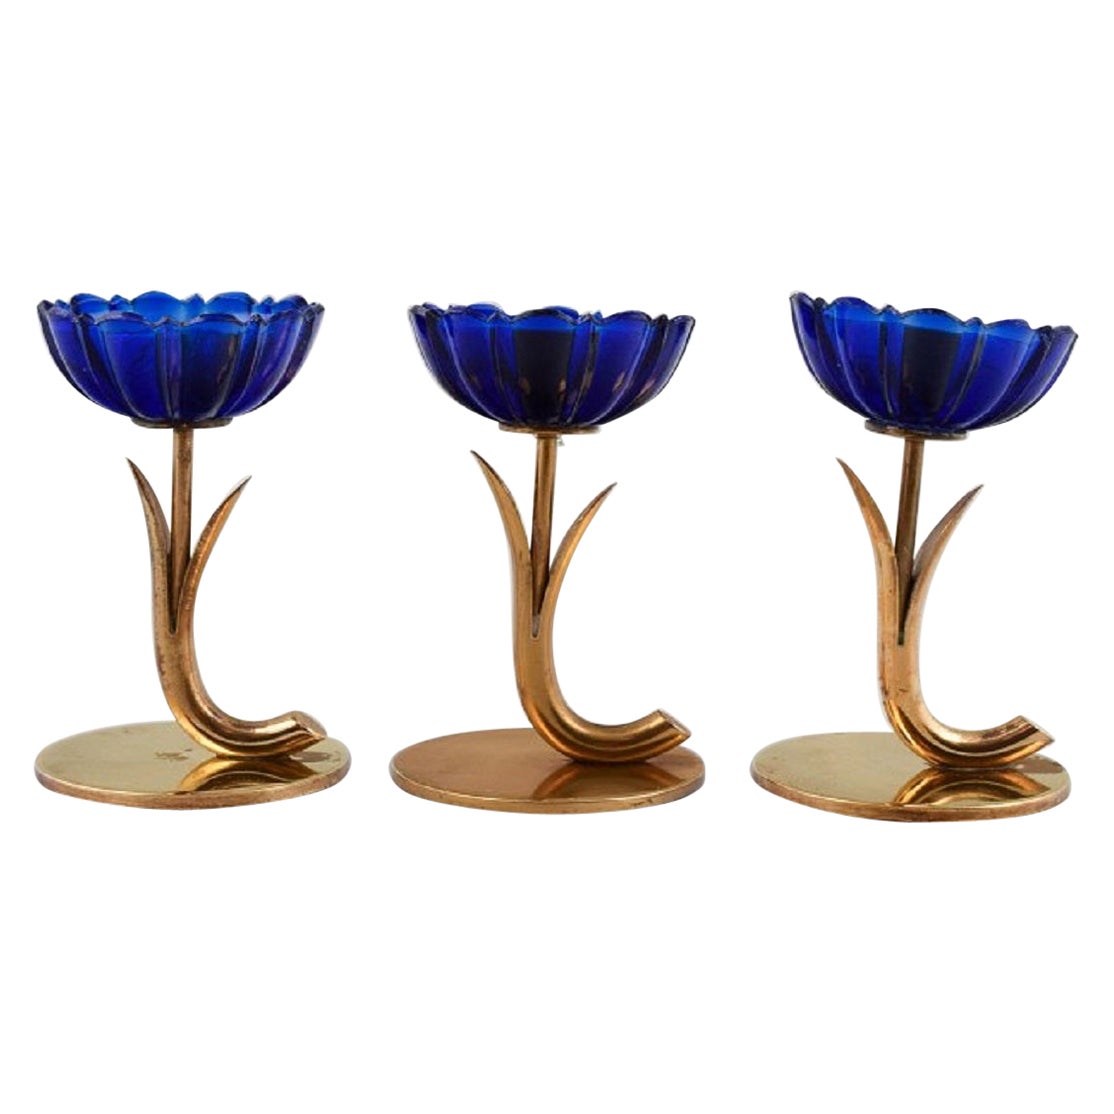 Gunnar Ander for Ystad Metall, Three Candlesticks in Brass and Blue Art Glass